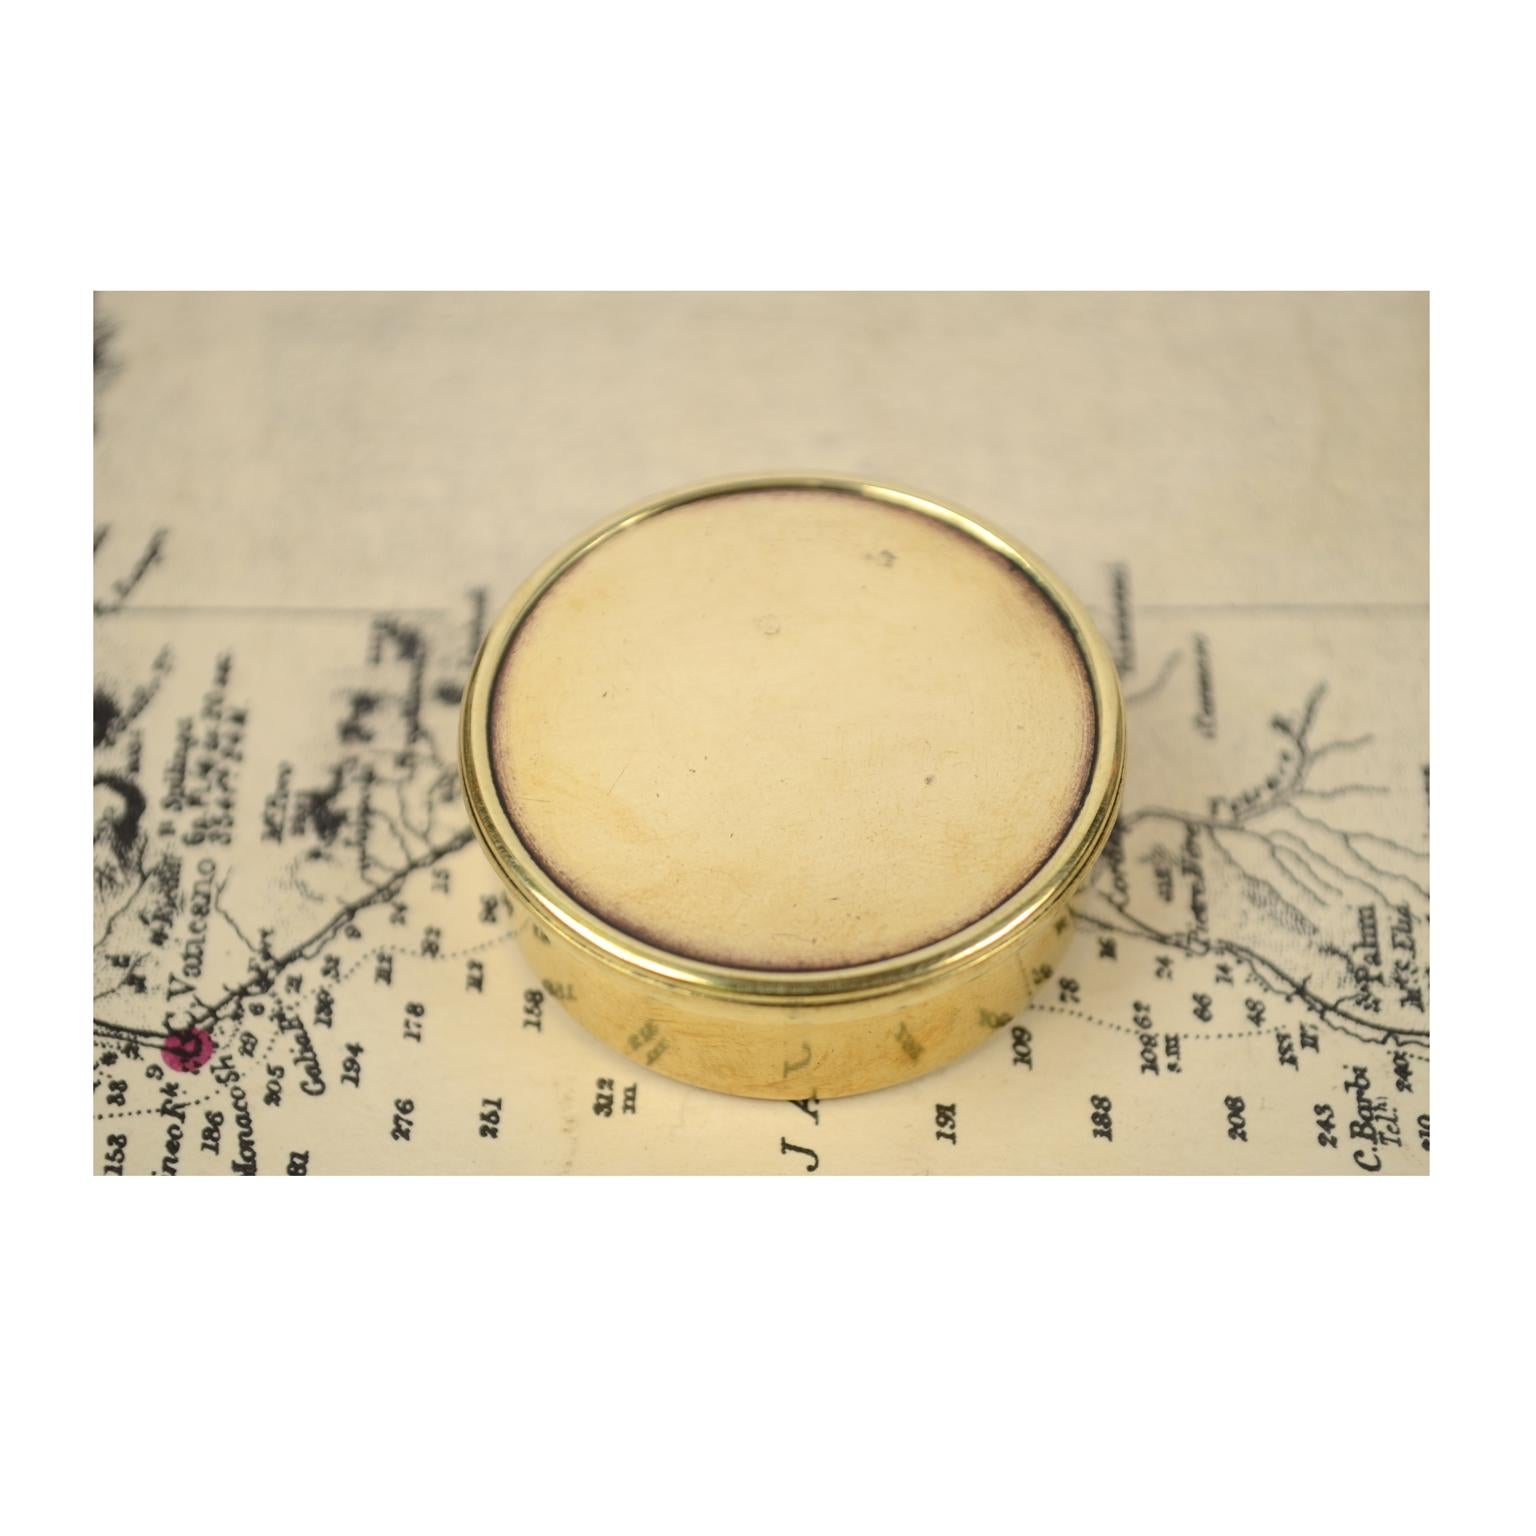 Dry Pocket Nautical Compass Placed in Its Original Box Made of Turned Brass 8